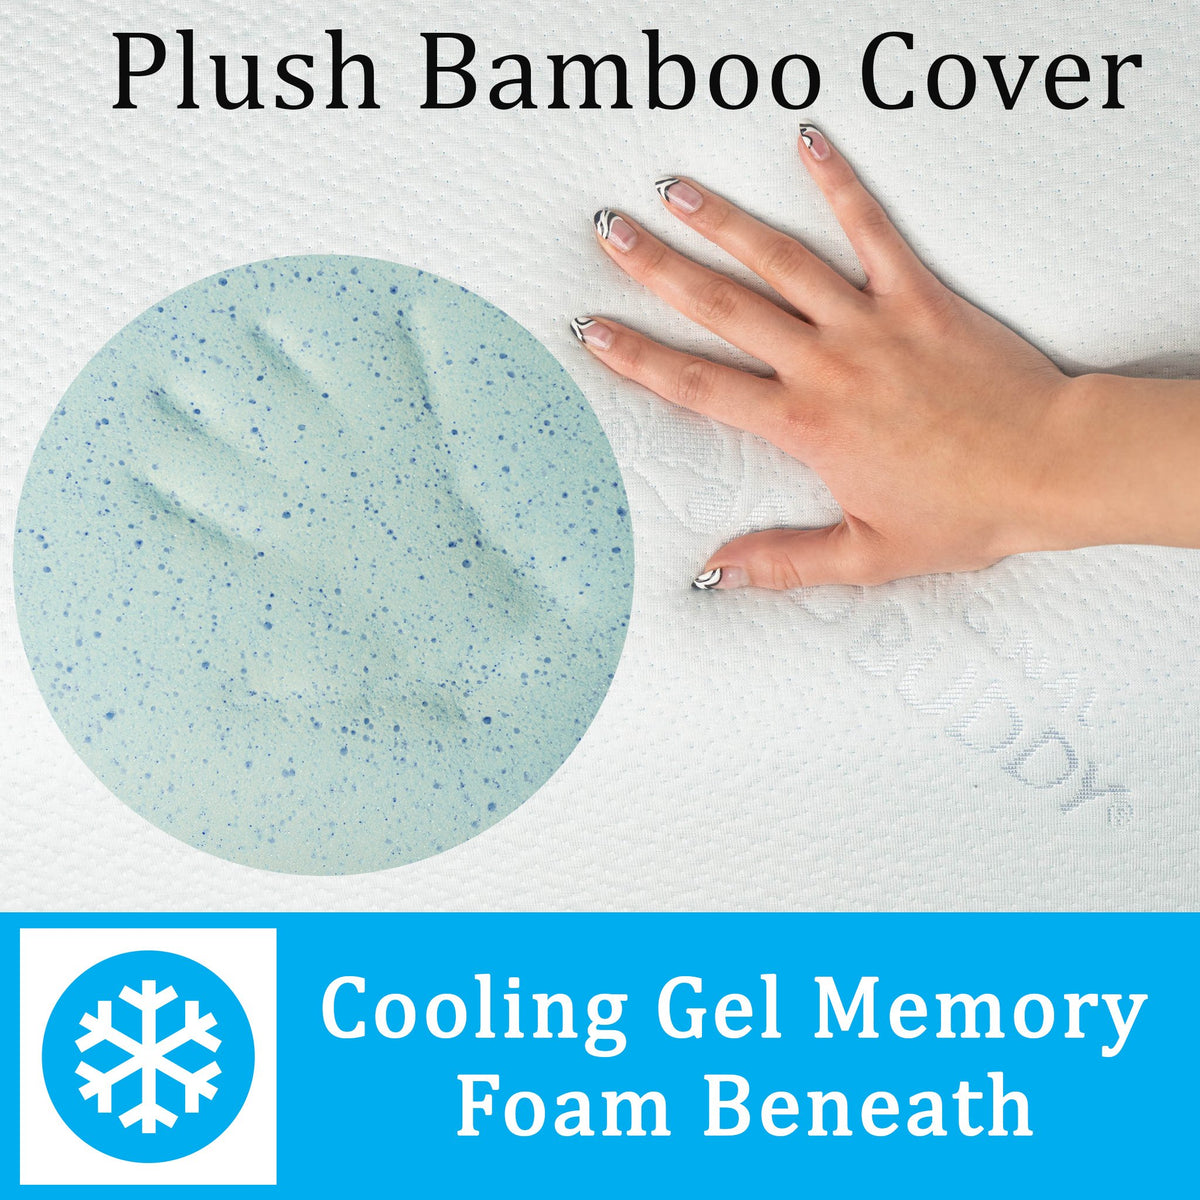 A hand pressing down on the Bed Buddy Leg Wedge Pillow. Text, Plush Bamboo Cover. Cooling Gel Memory Foam Beneath.